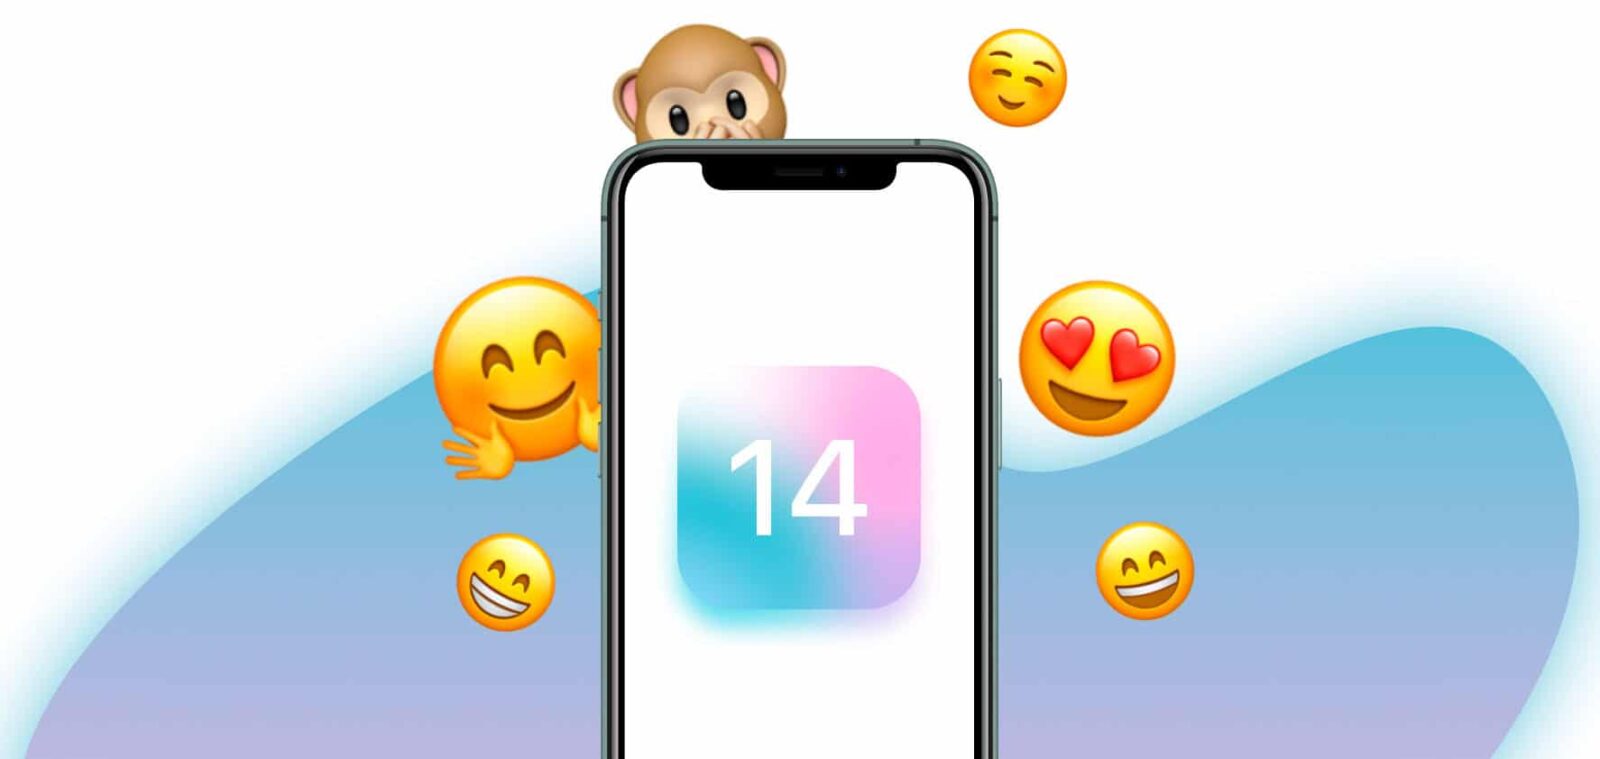 IOS 14 new features